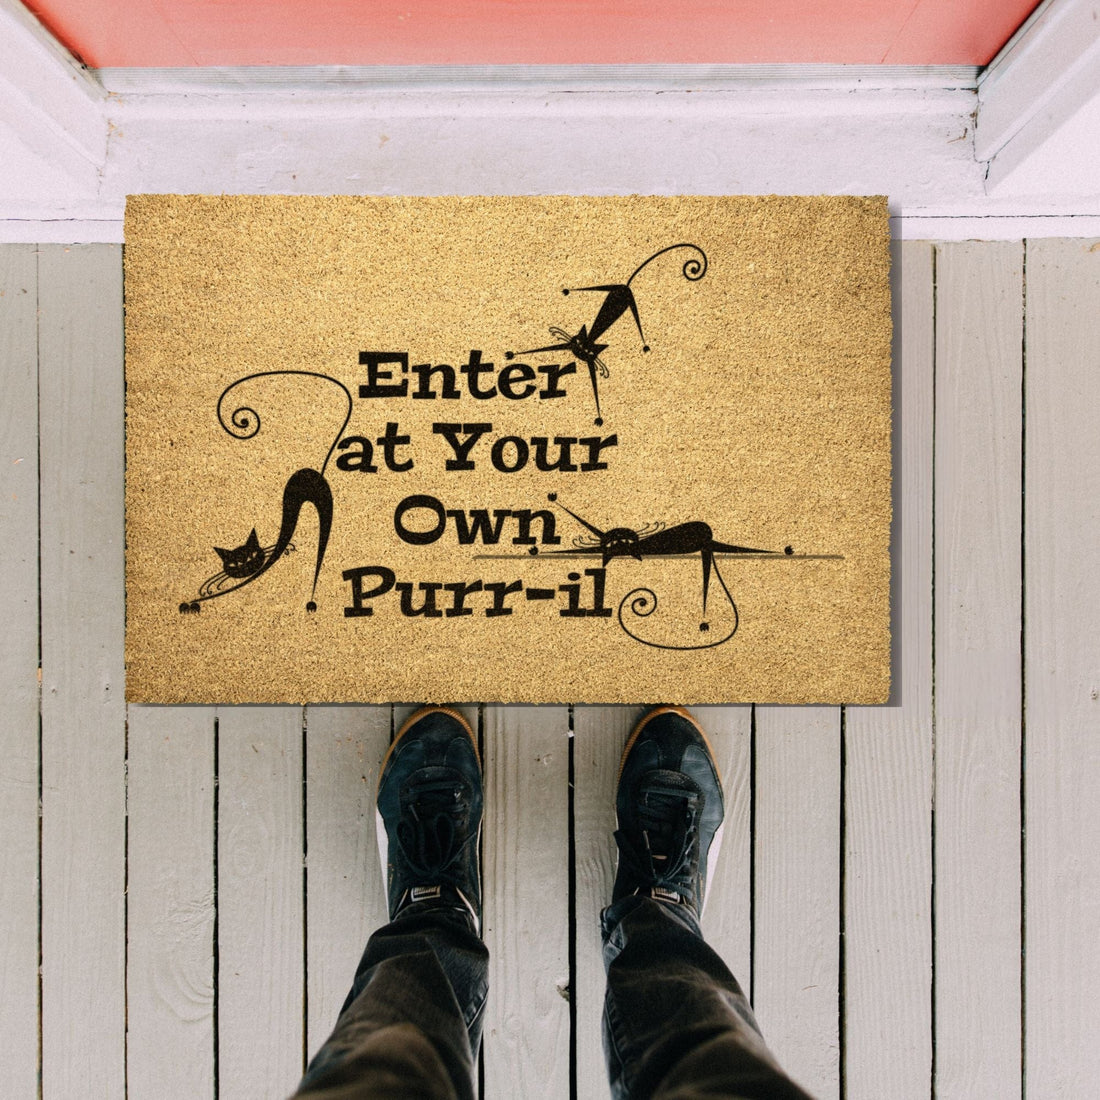 Kate McEnroe New York Atomic Cat, Enter at Your Own Purr - il Doormat, Mid Century Modern Kitty, Retro Funny MatDoor Mats36x24outdoor